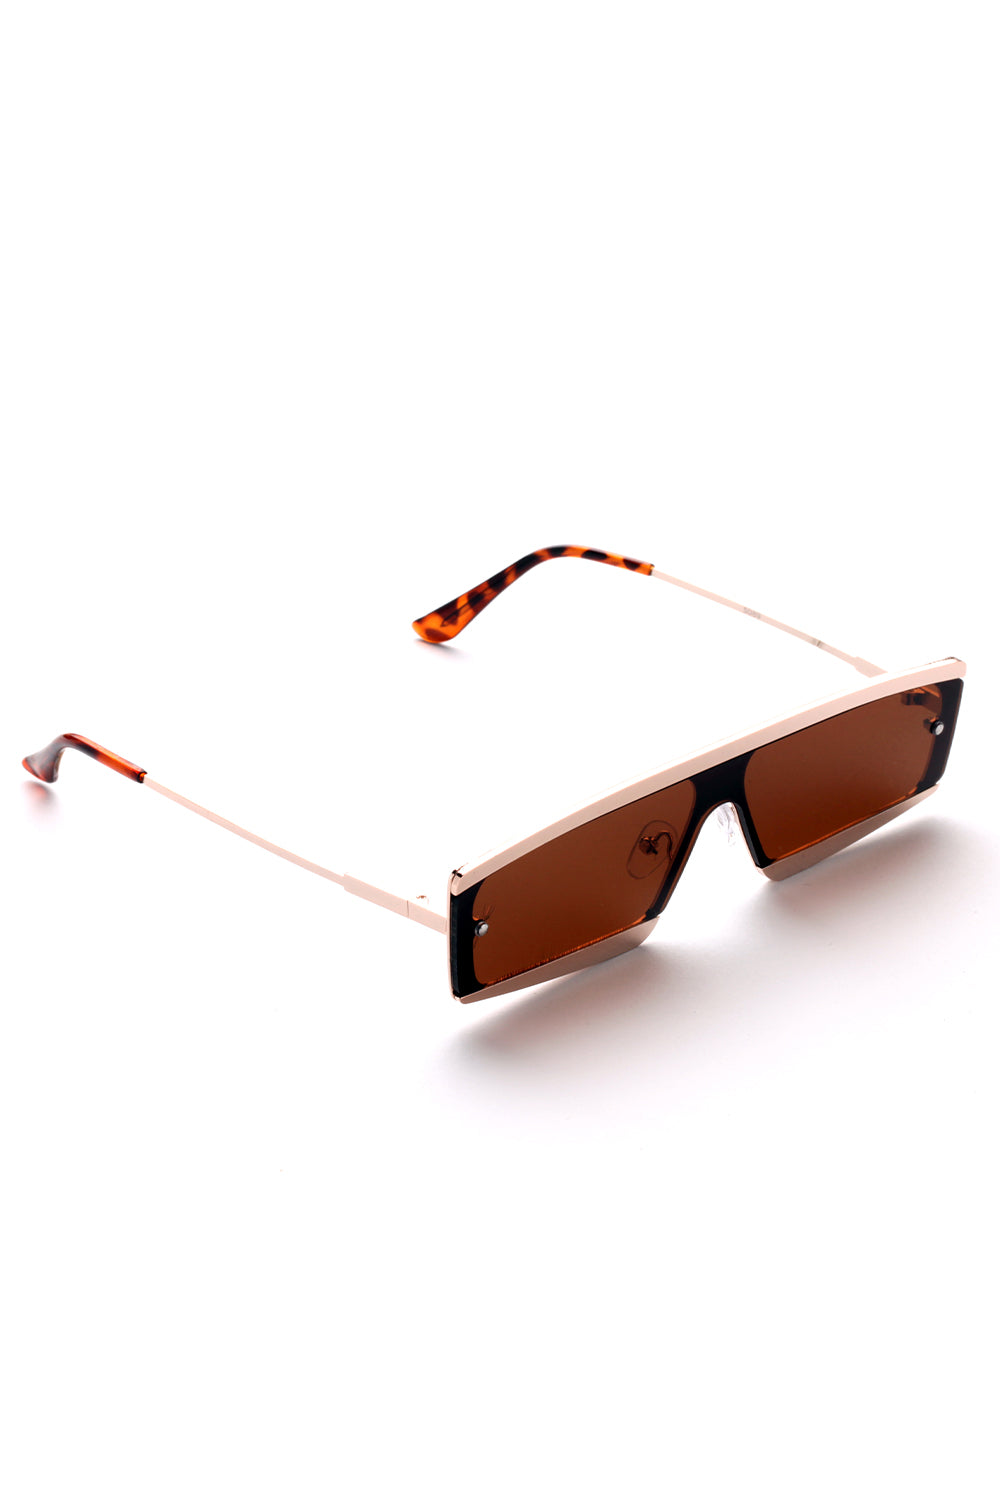 The Hunger Sunglasses - Slick It Up 